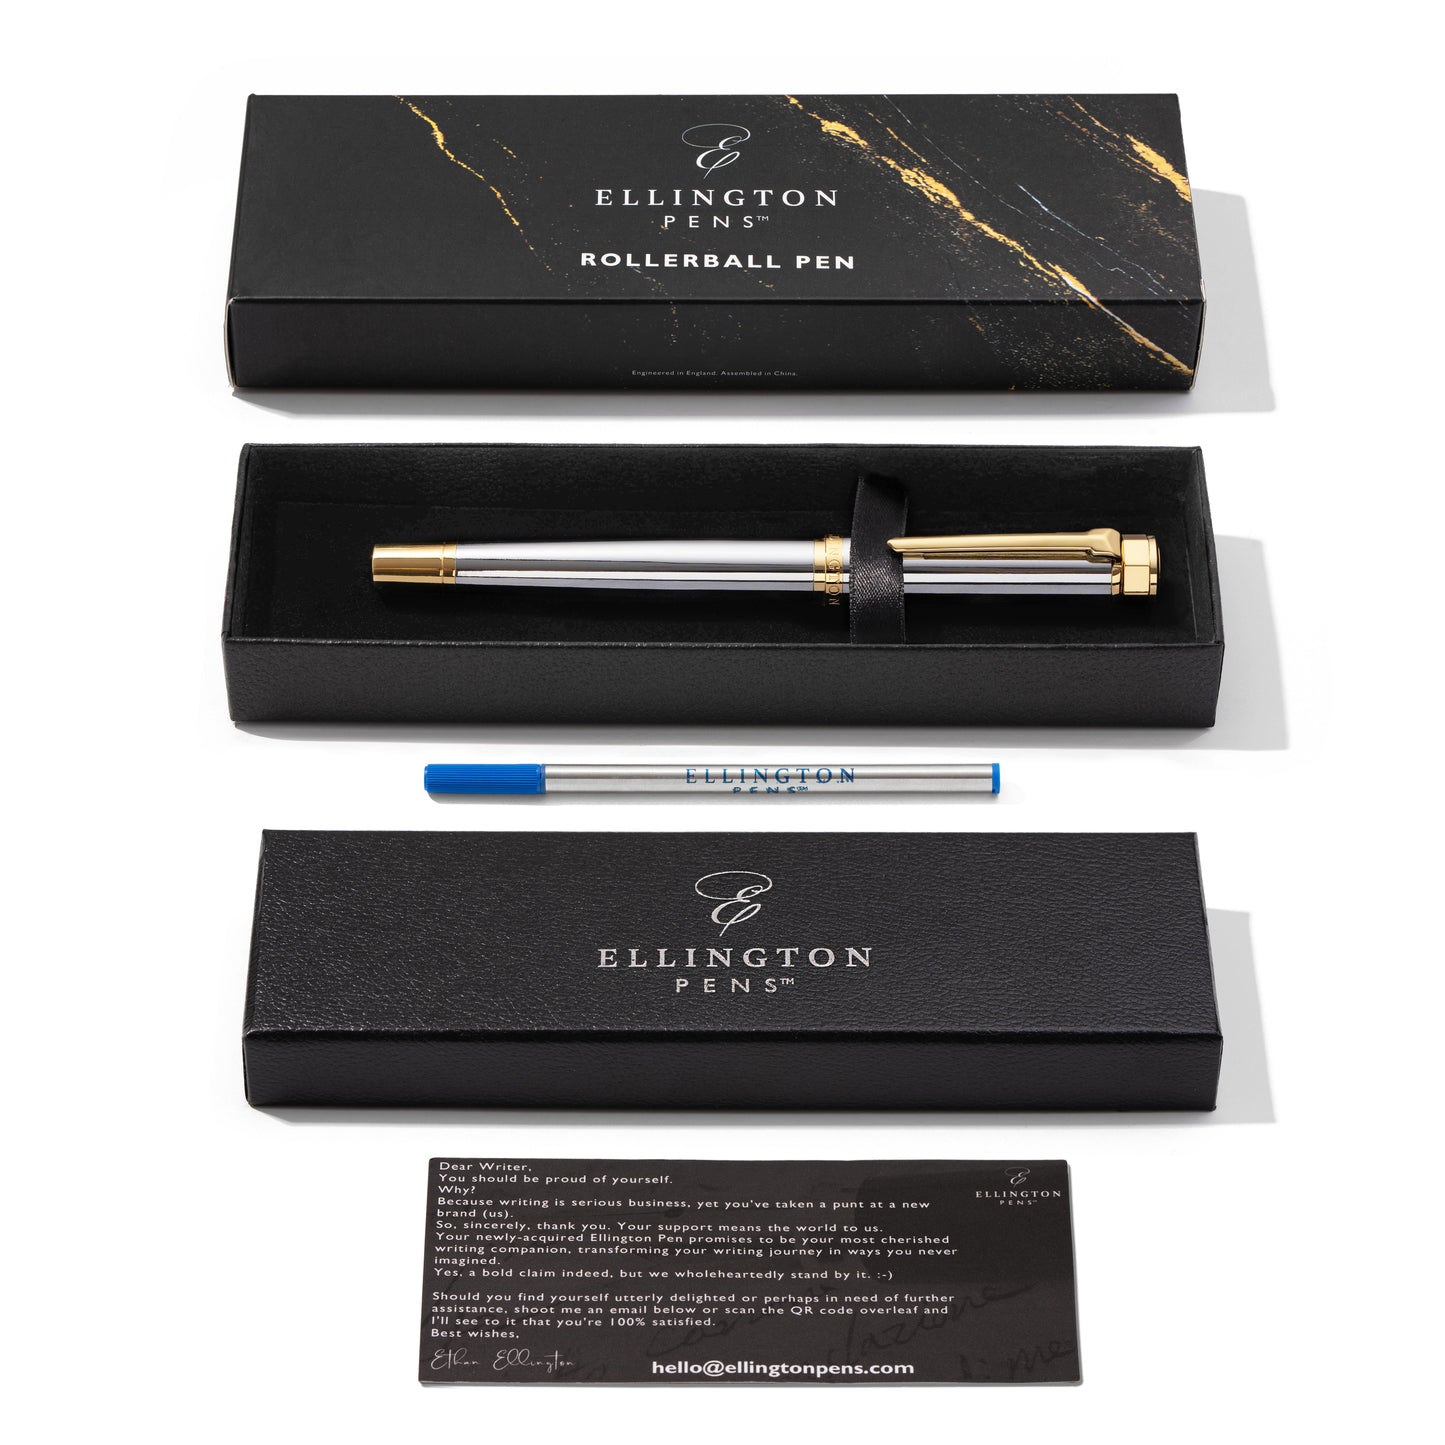 The Presidential Oath Rollerball